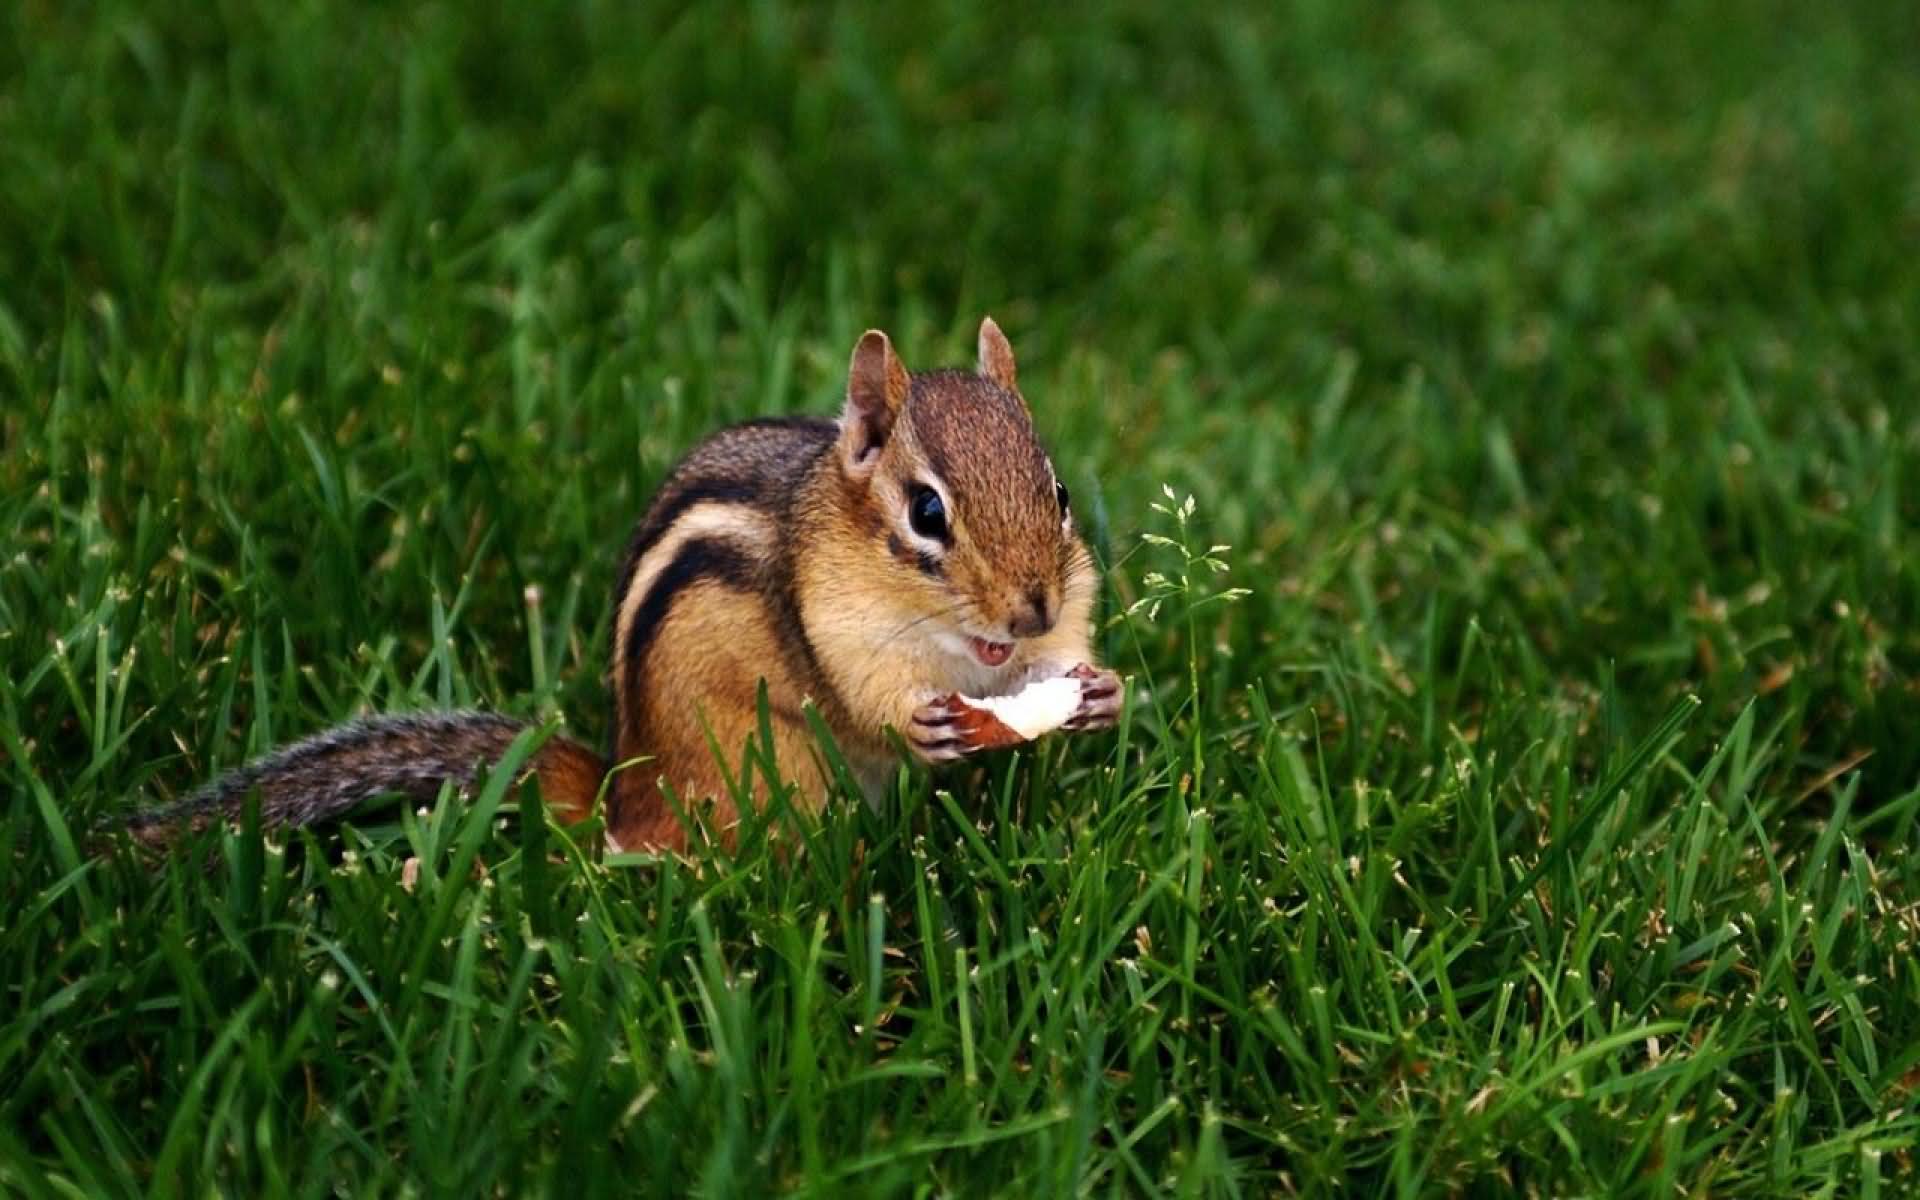 Funny Cute Chipmunk Eating Nuts Image